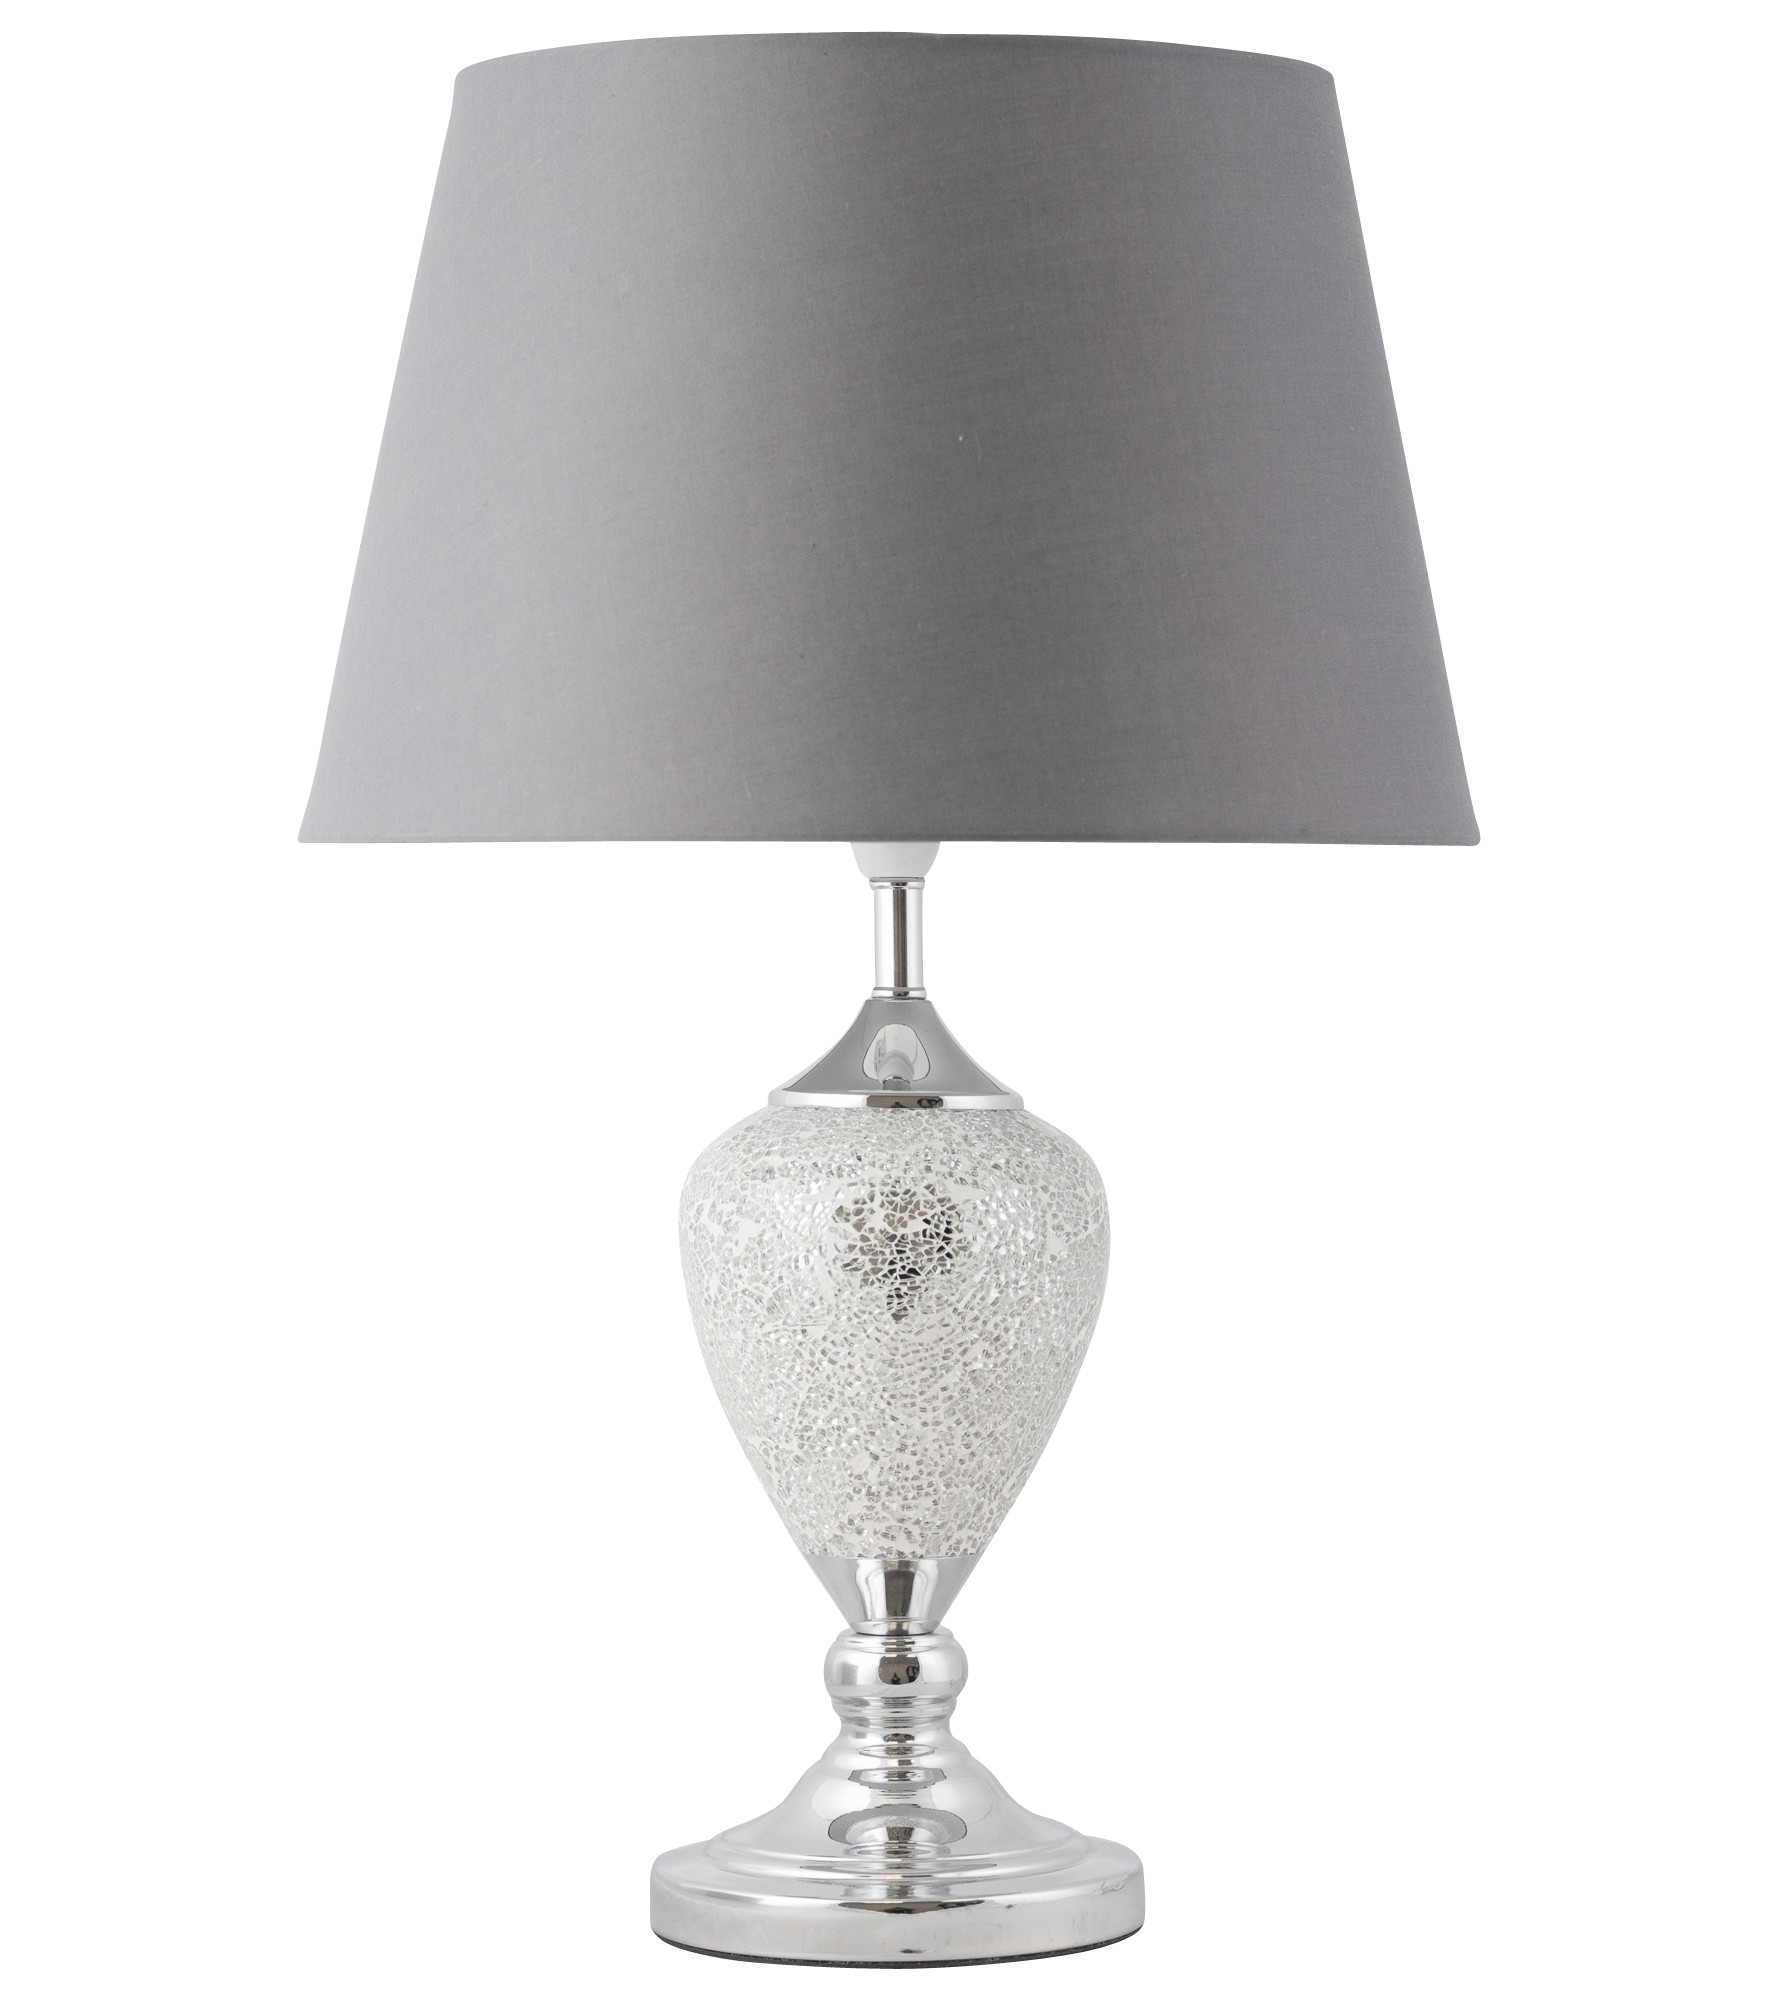 Mirrored crackle glass table lamp with grey shade 6